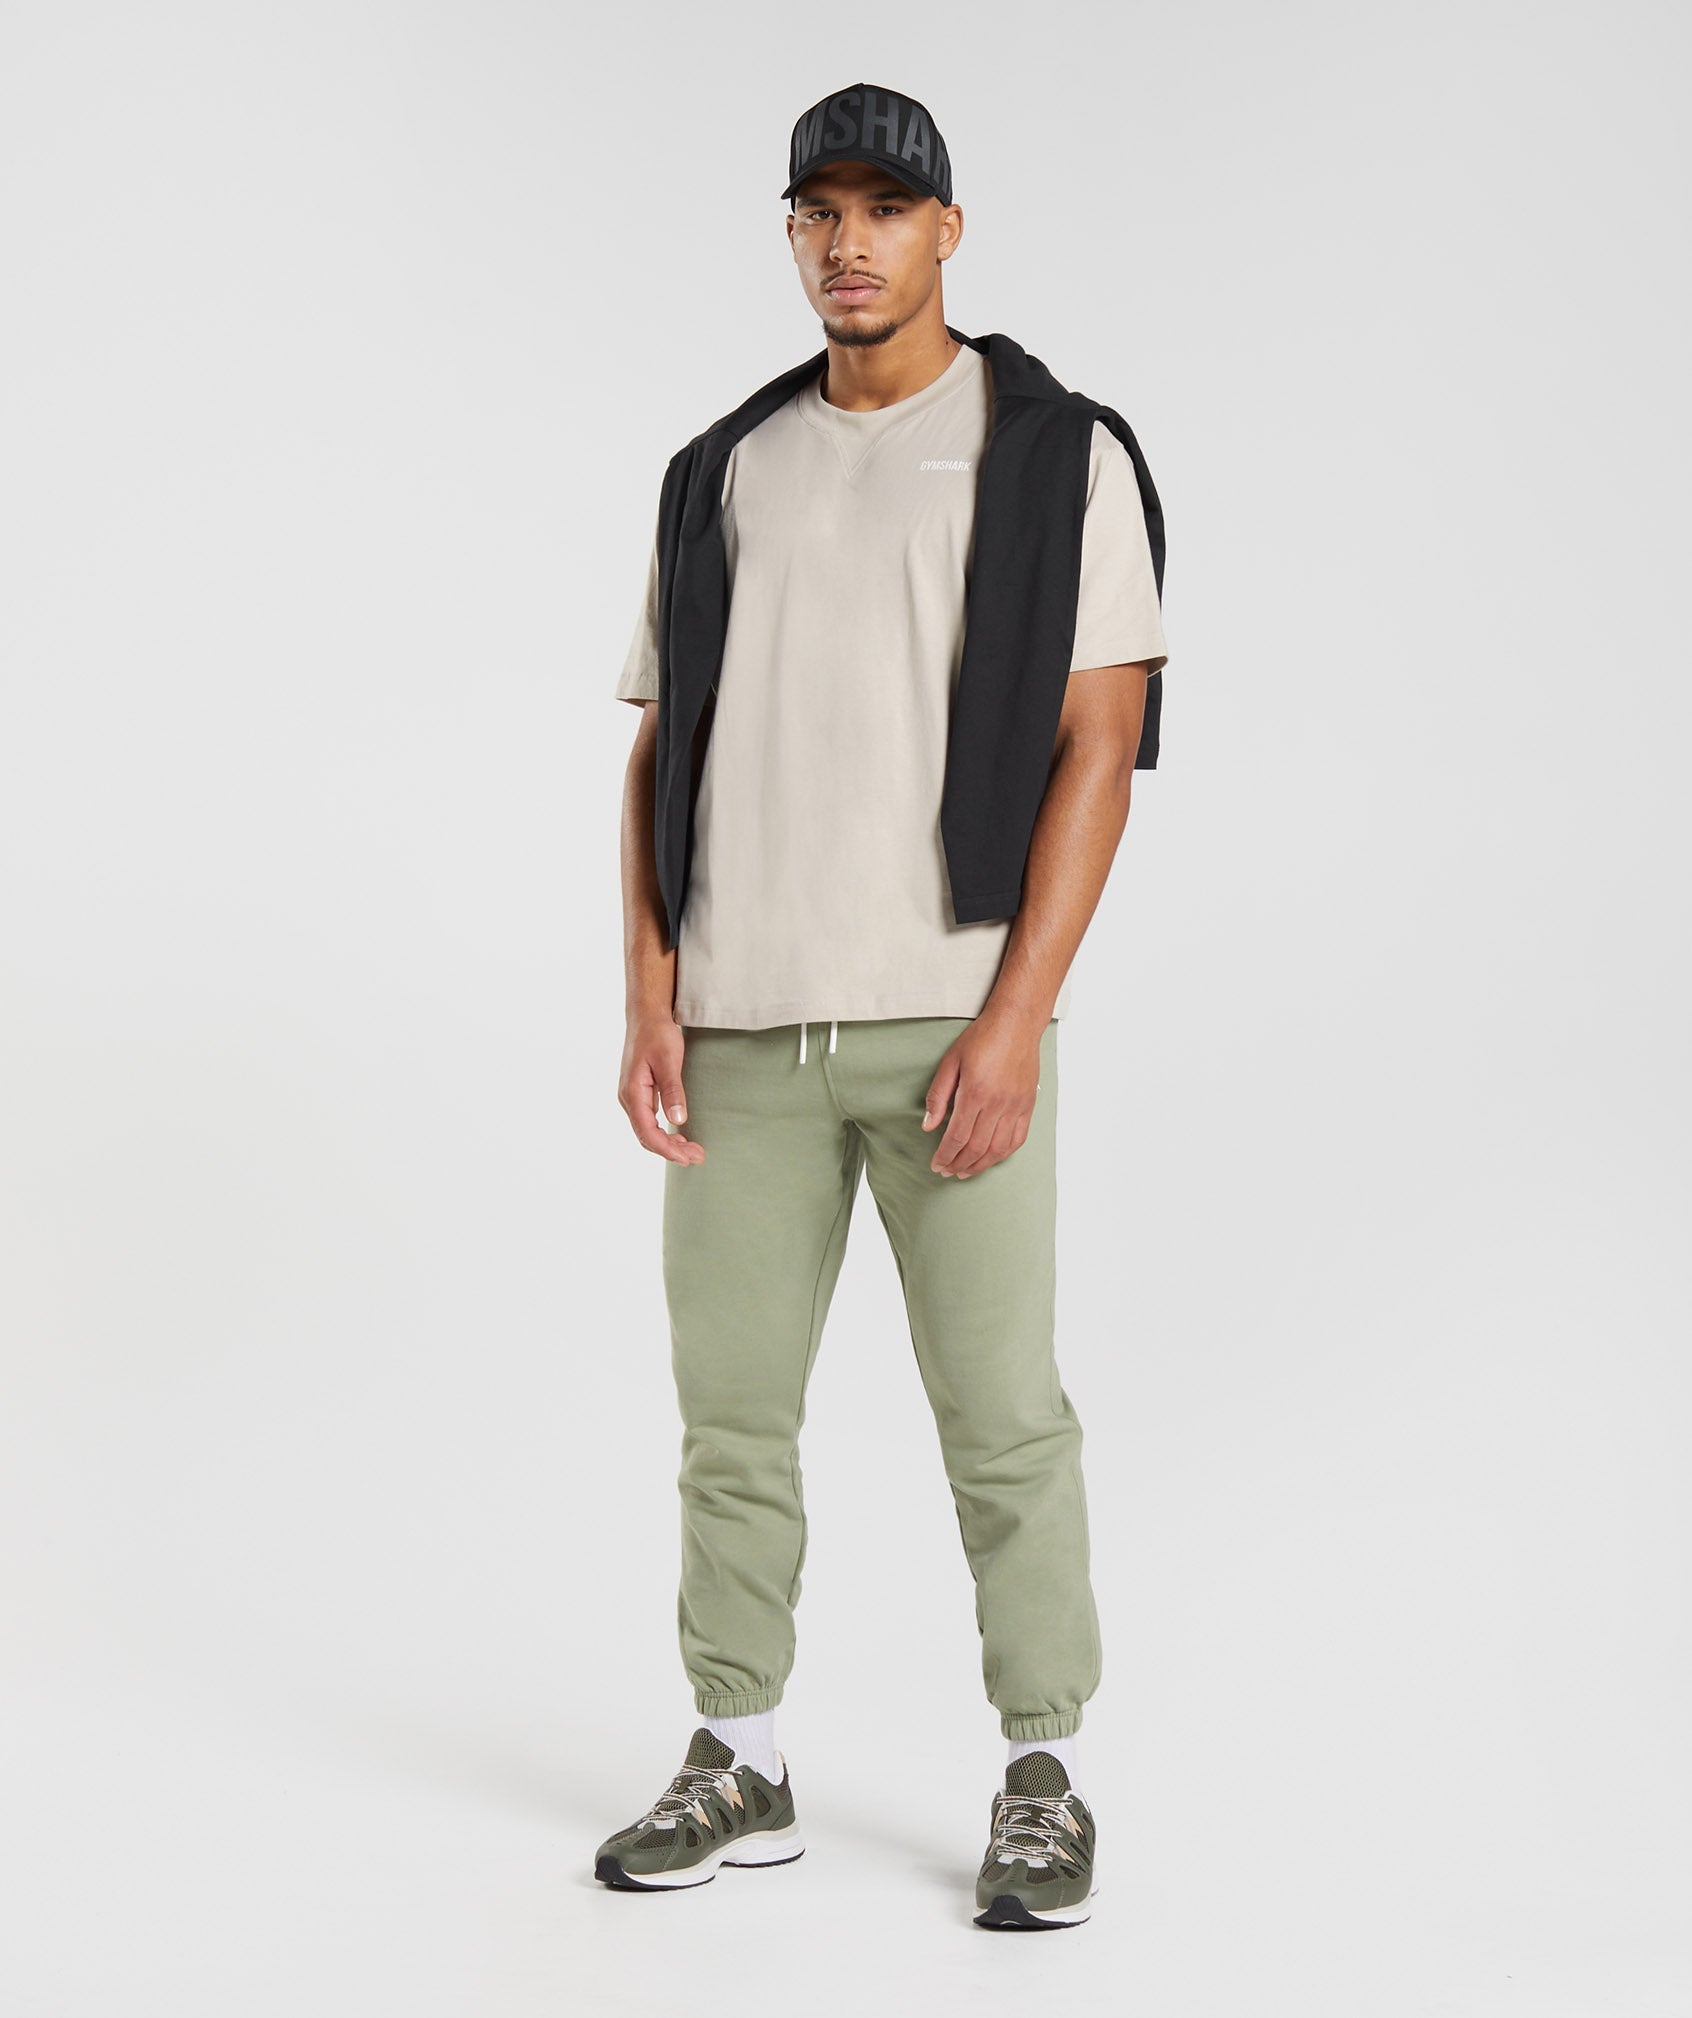 Rest Day Sweats Joggers in Sage Green - view 4